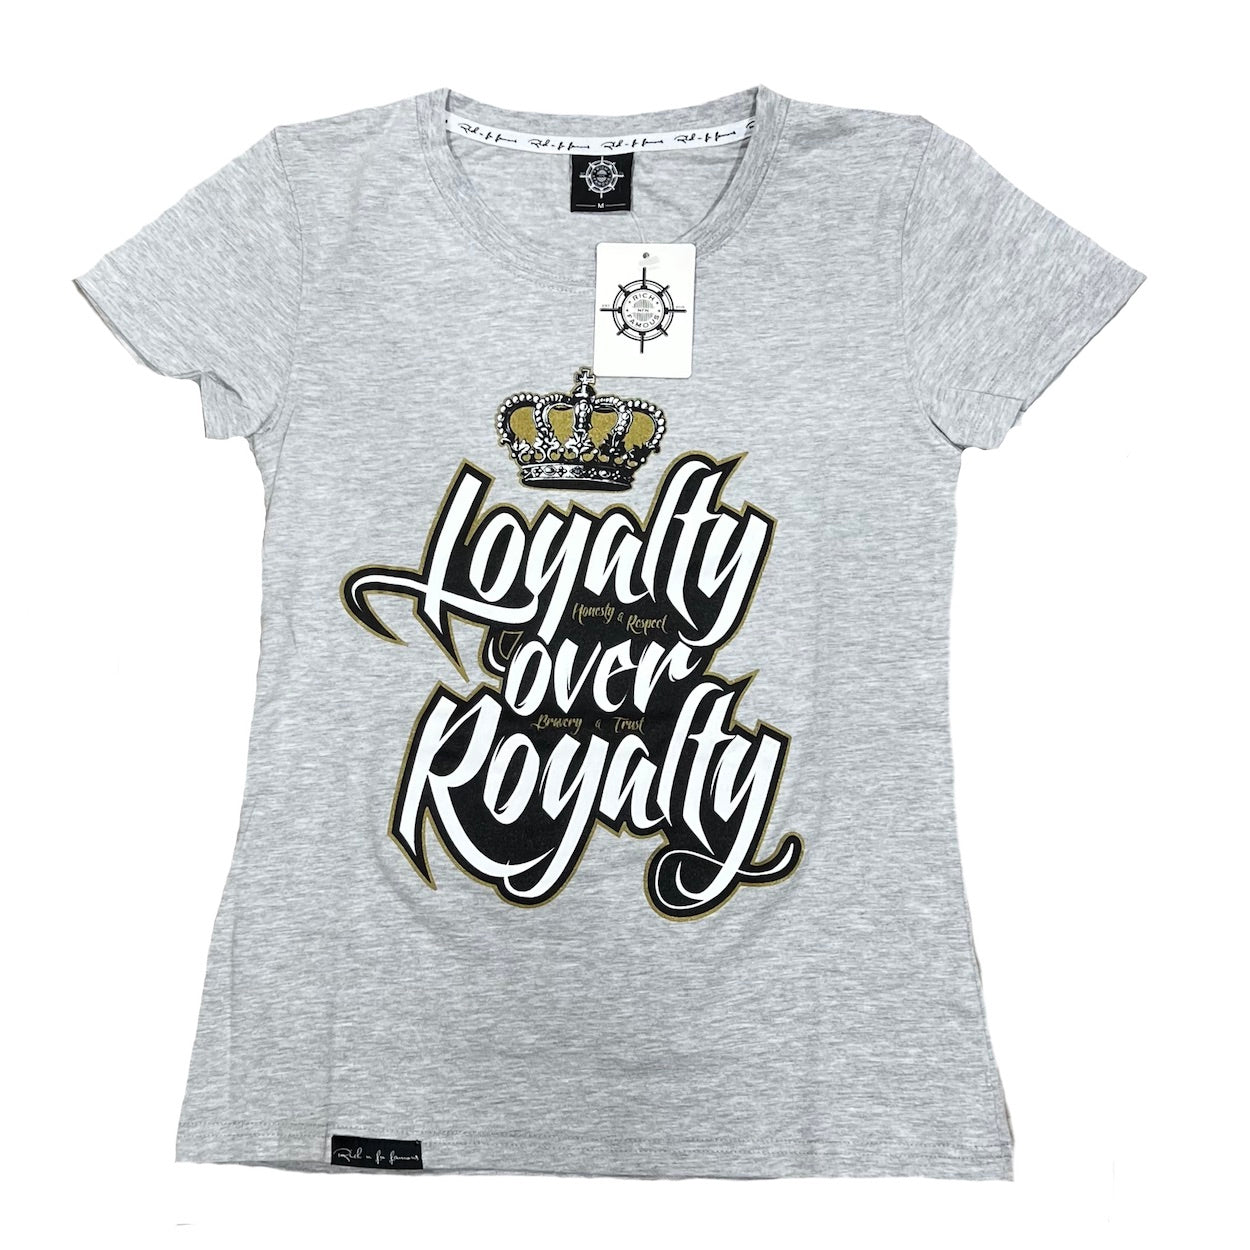 Women's T Shirt Fitted Premium Shirt With Unique Art Royalty Tee